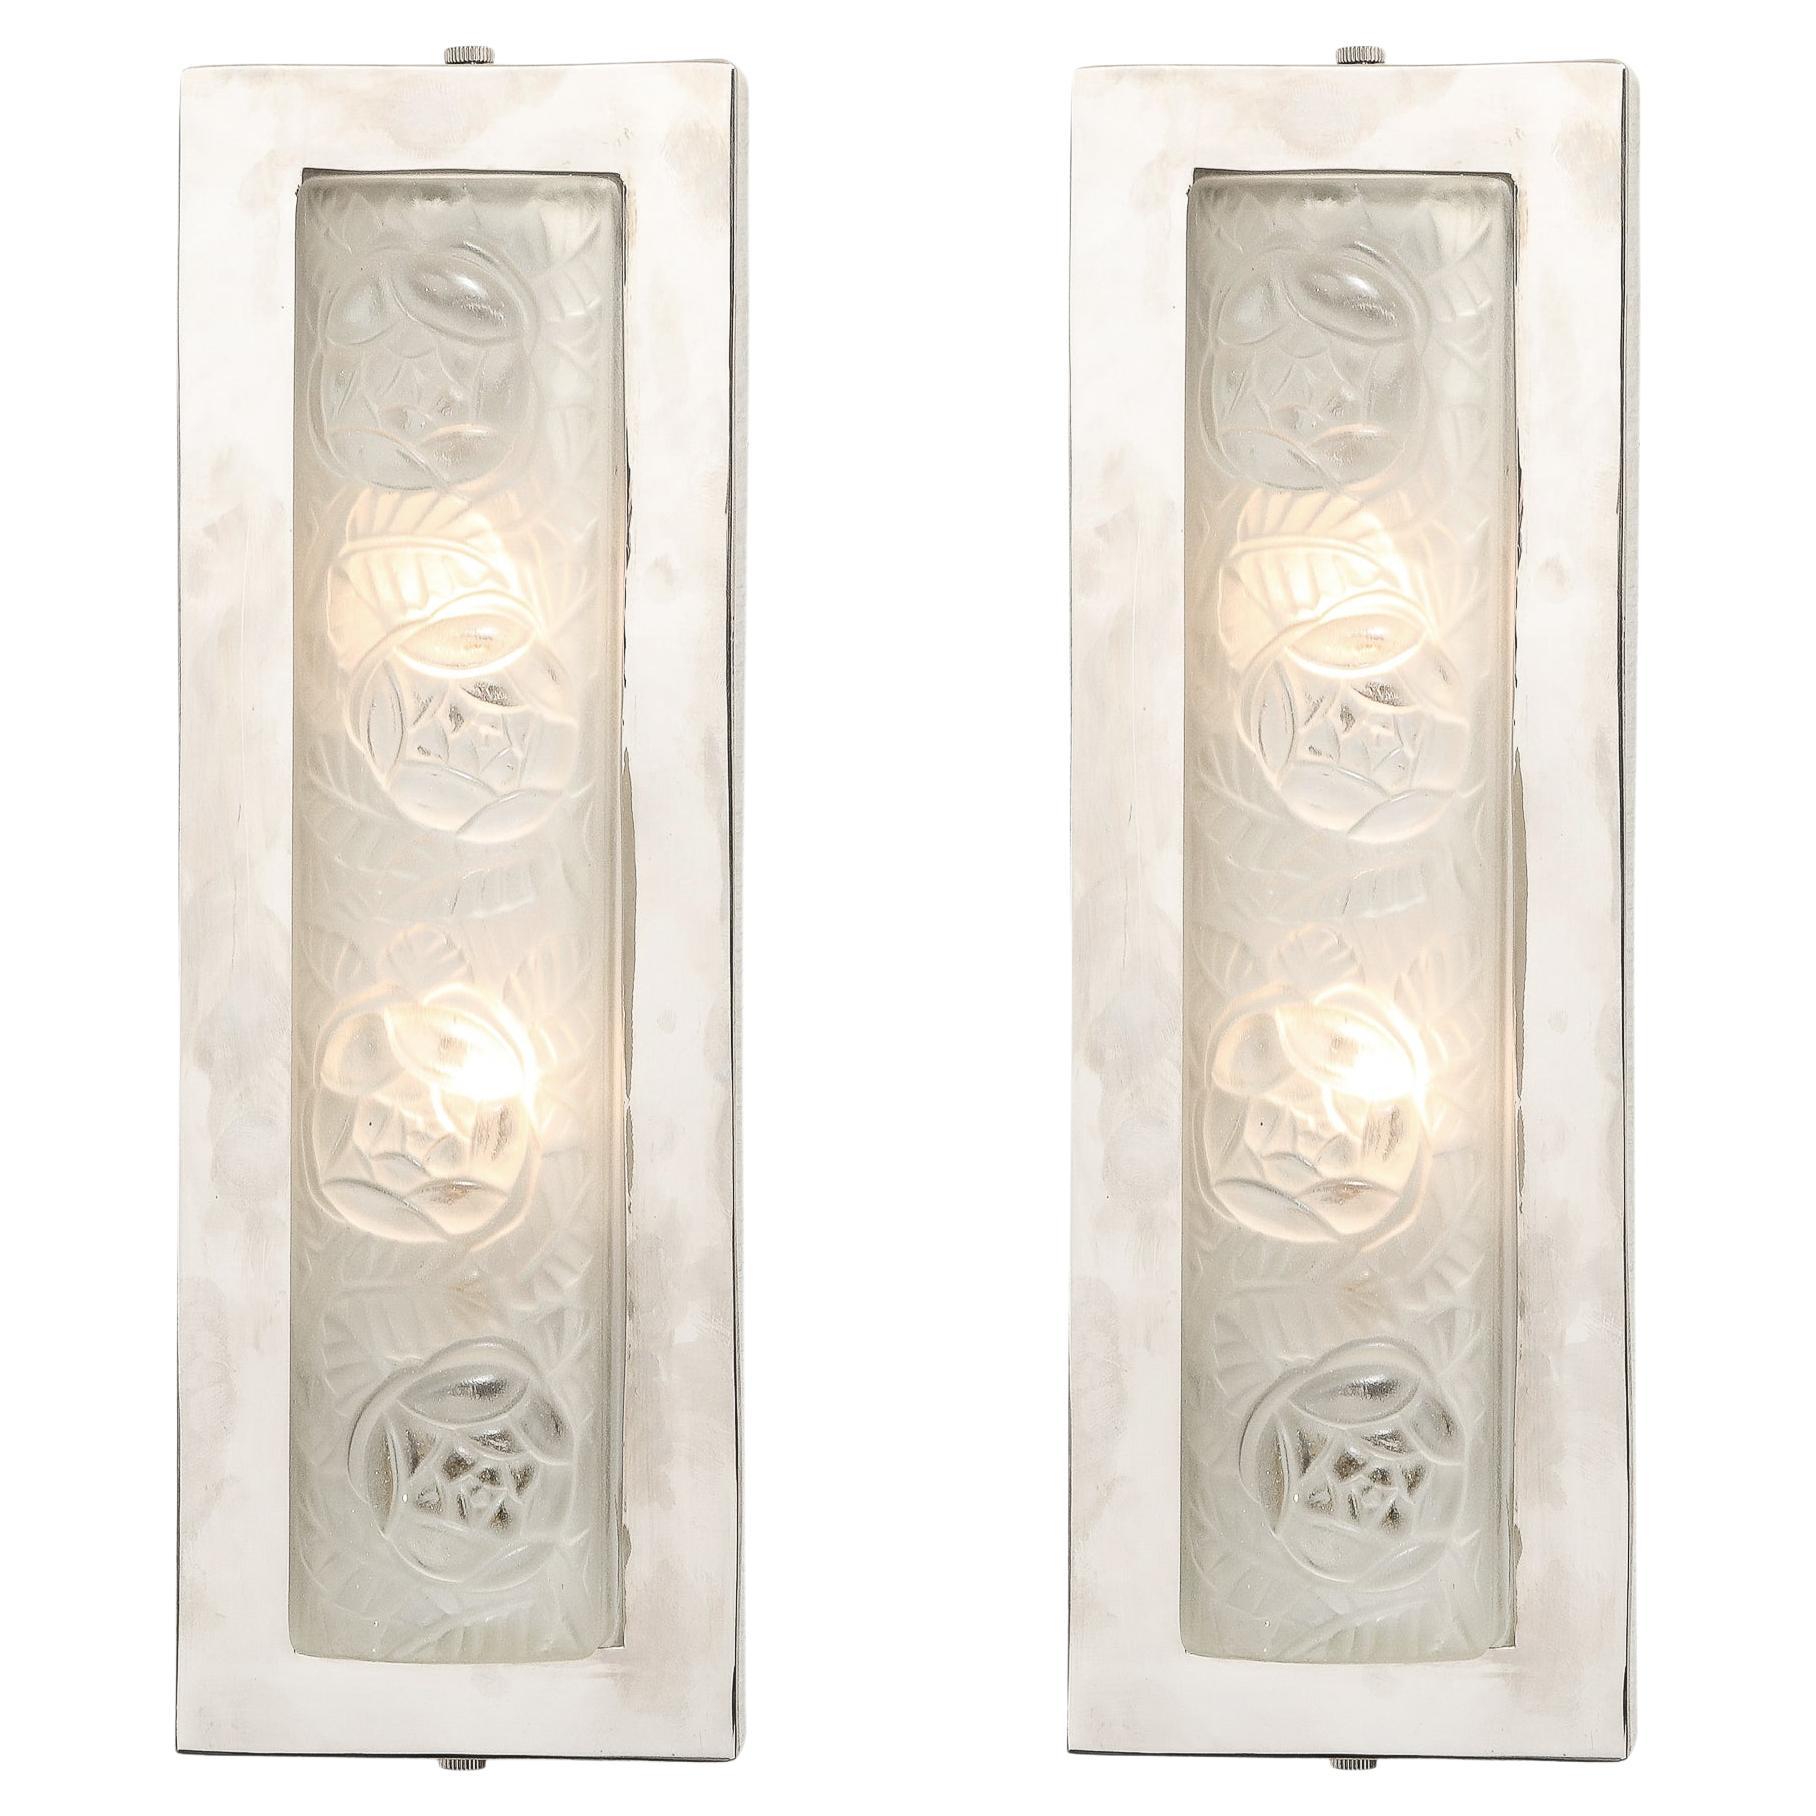 Pair of Art Deco Frosted Glass & Chrome Rectangular Sconces w/ Rose Motifs For Sale